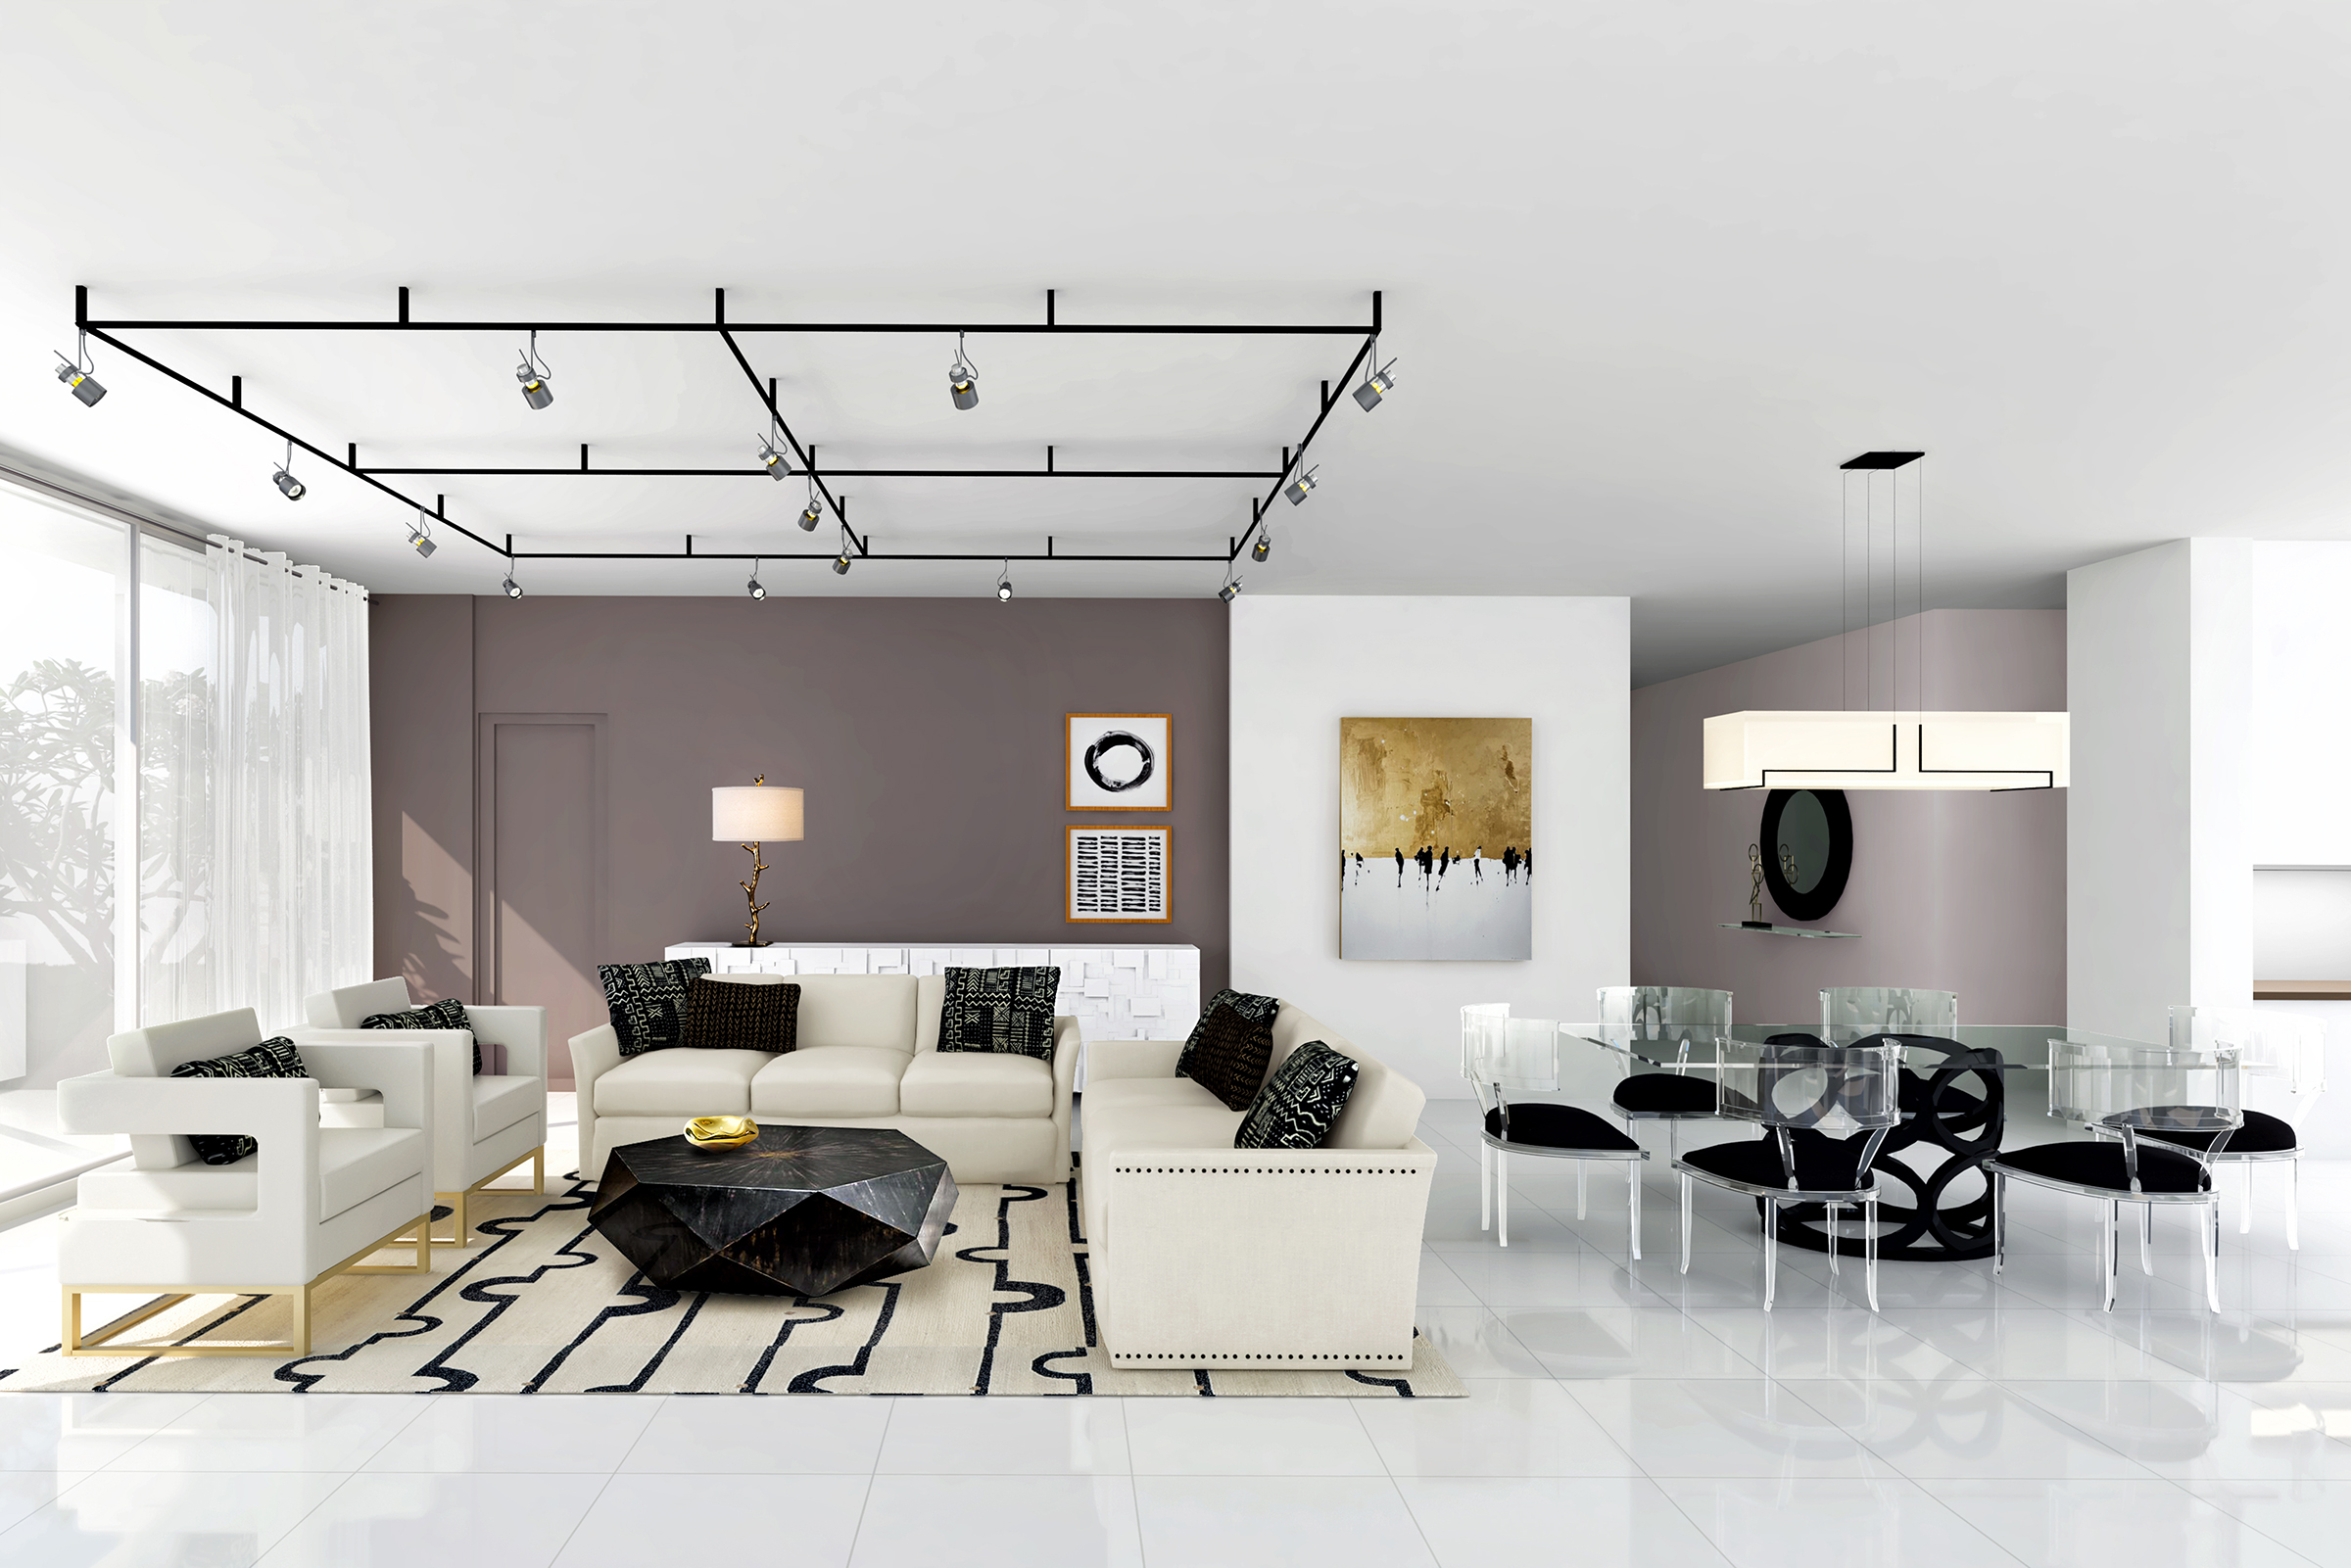 Current Project Underway - 3D Rendering Optional as visual aid for client.